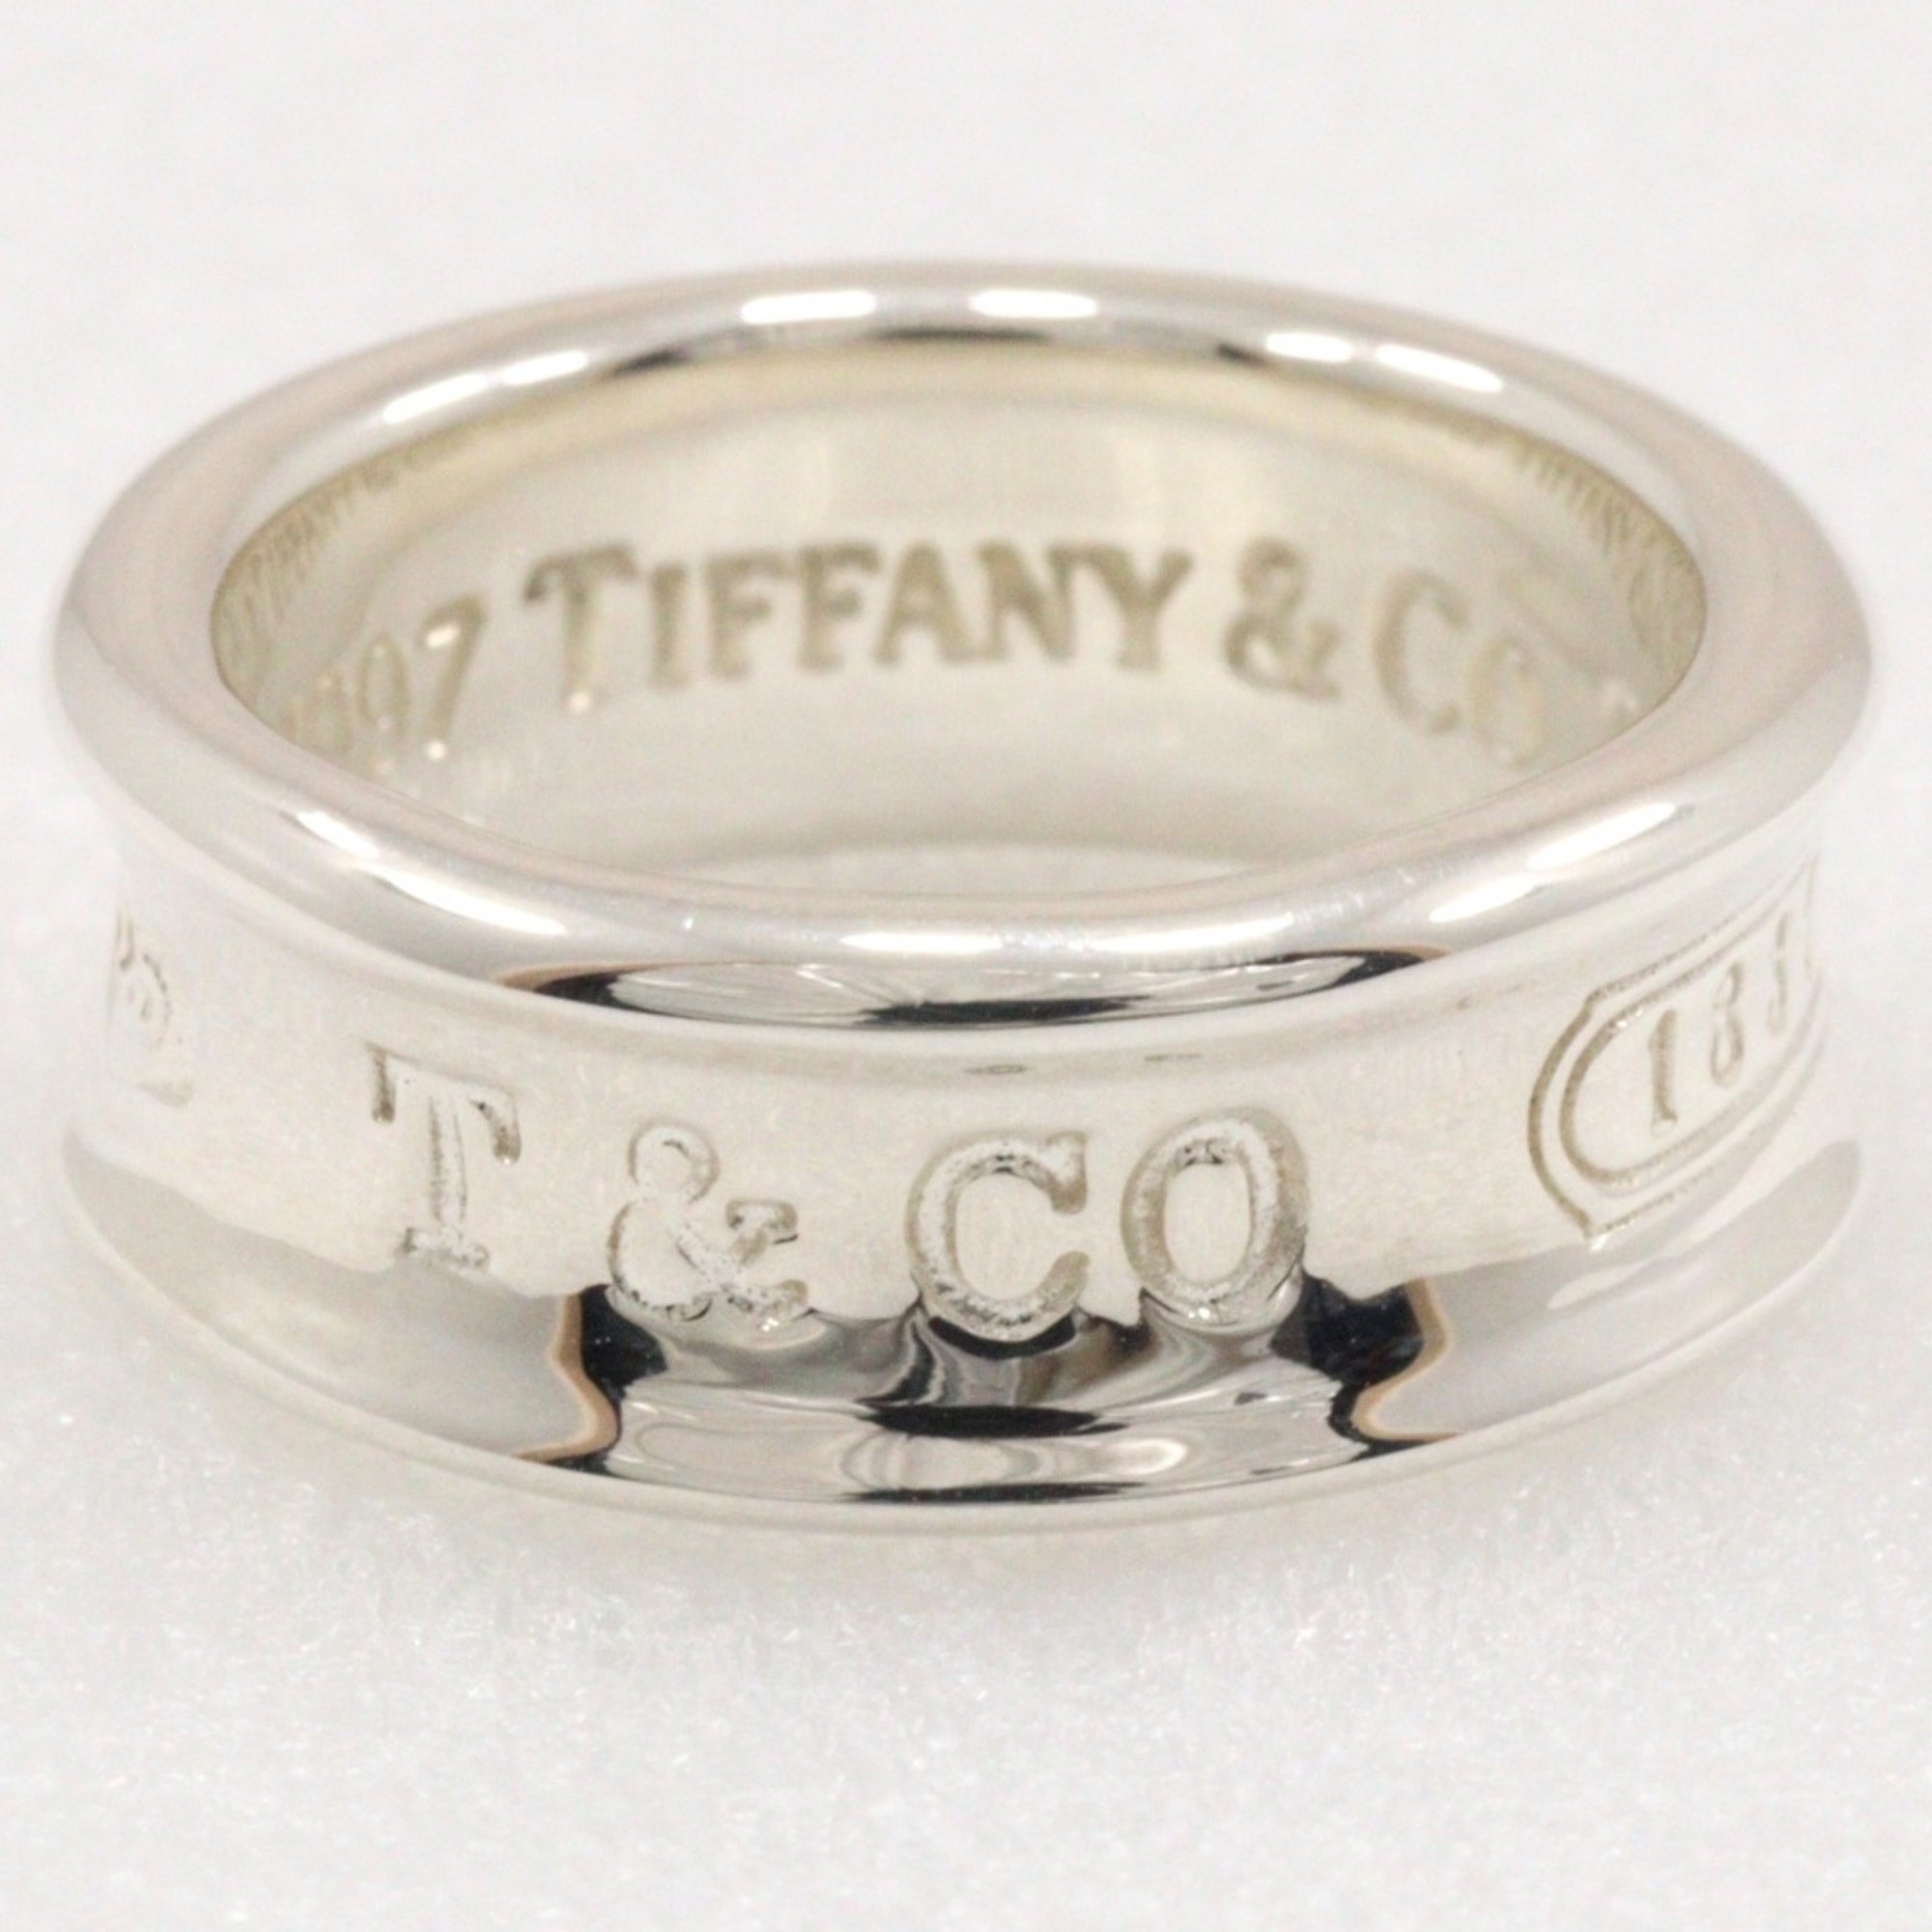 Tiffany & Co. 1837 size 9 ring, 925 silver, approx. 6.4g, 1837, for women